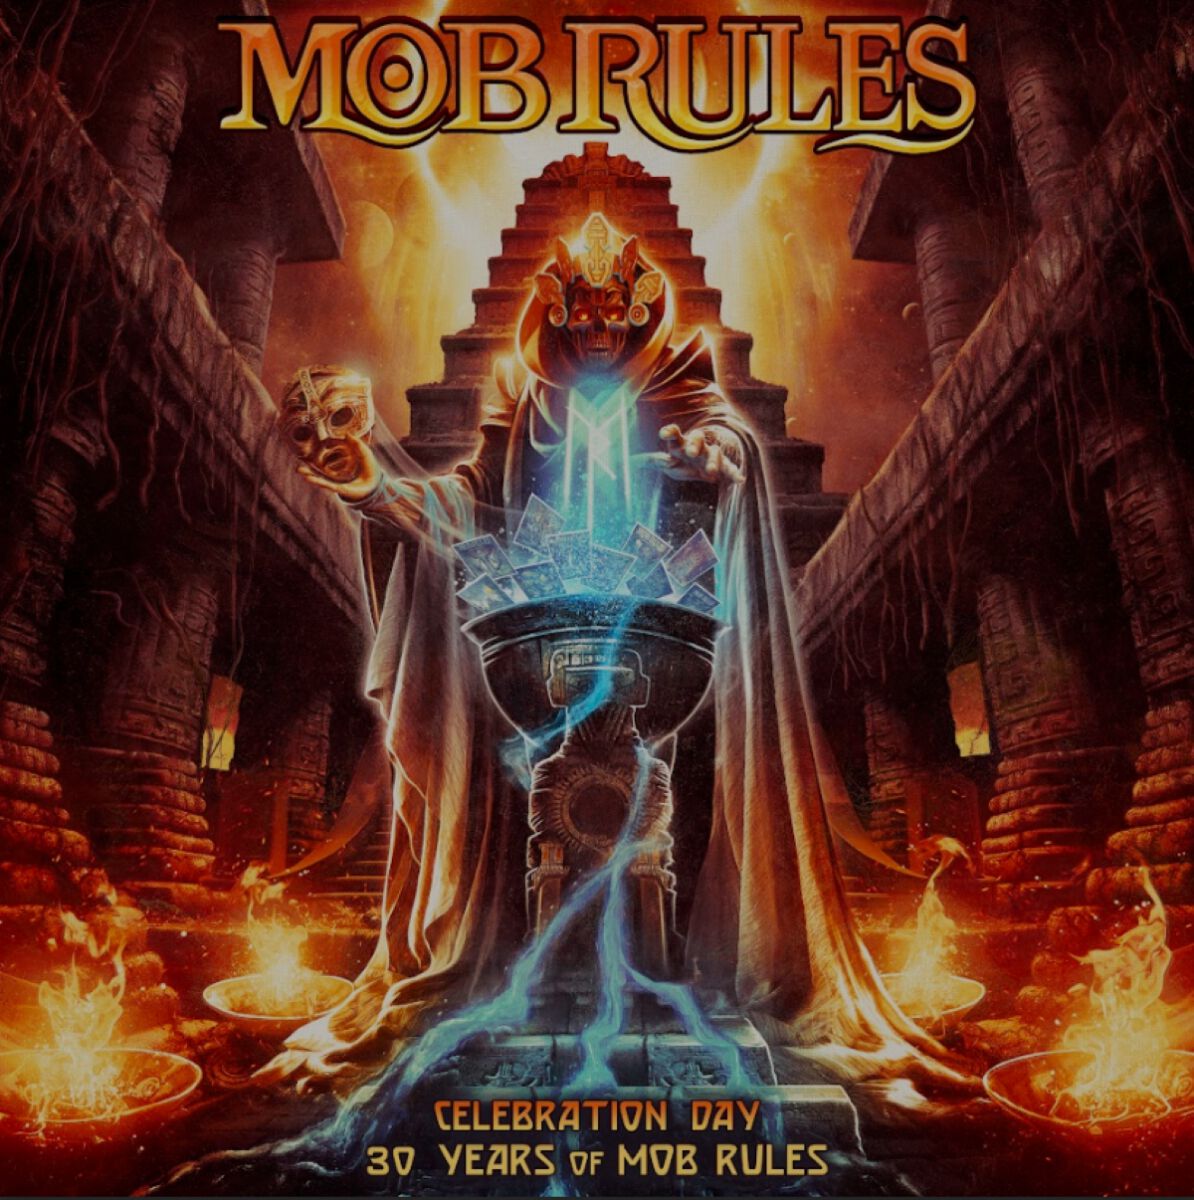 Celebration Day - 30 Years Of Mob Rules von Mob Rules - 2-CD (Digipak)